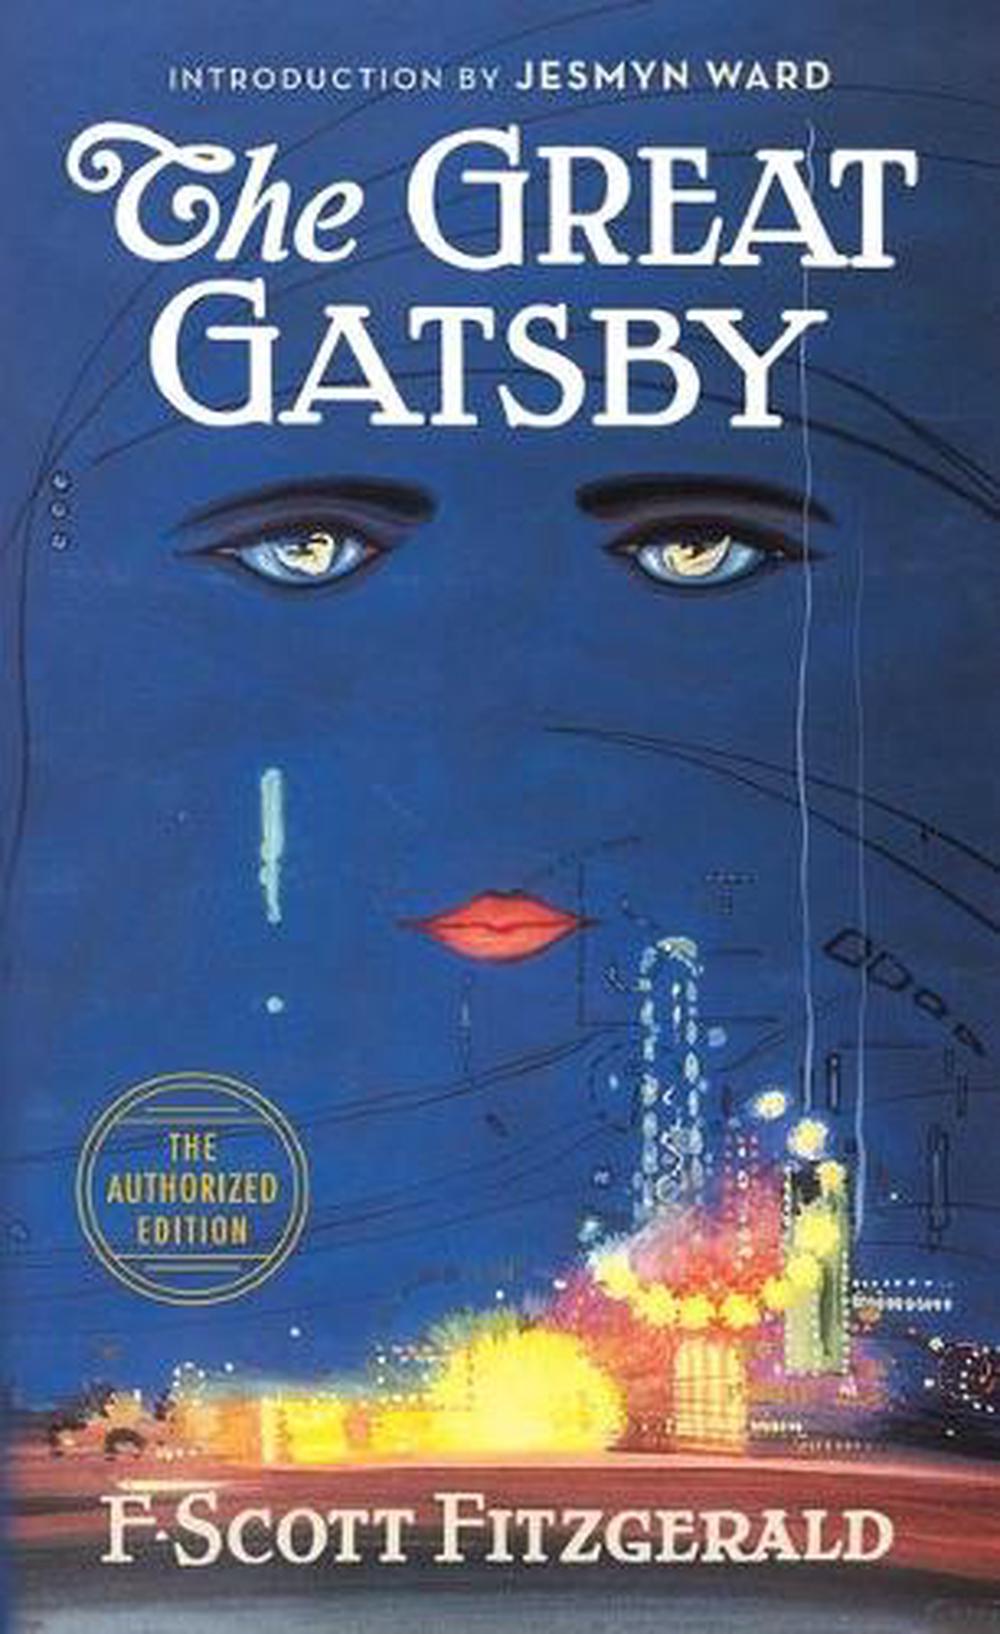 in chapter 3 of the great gatsby why does fitzgerald tell us about the auto accident